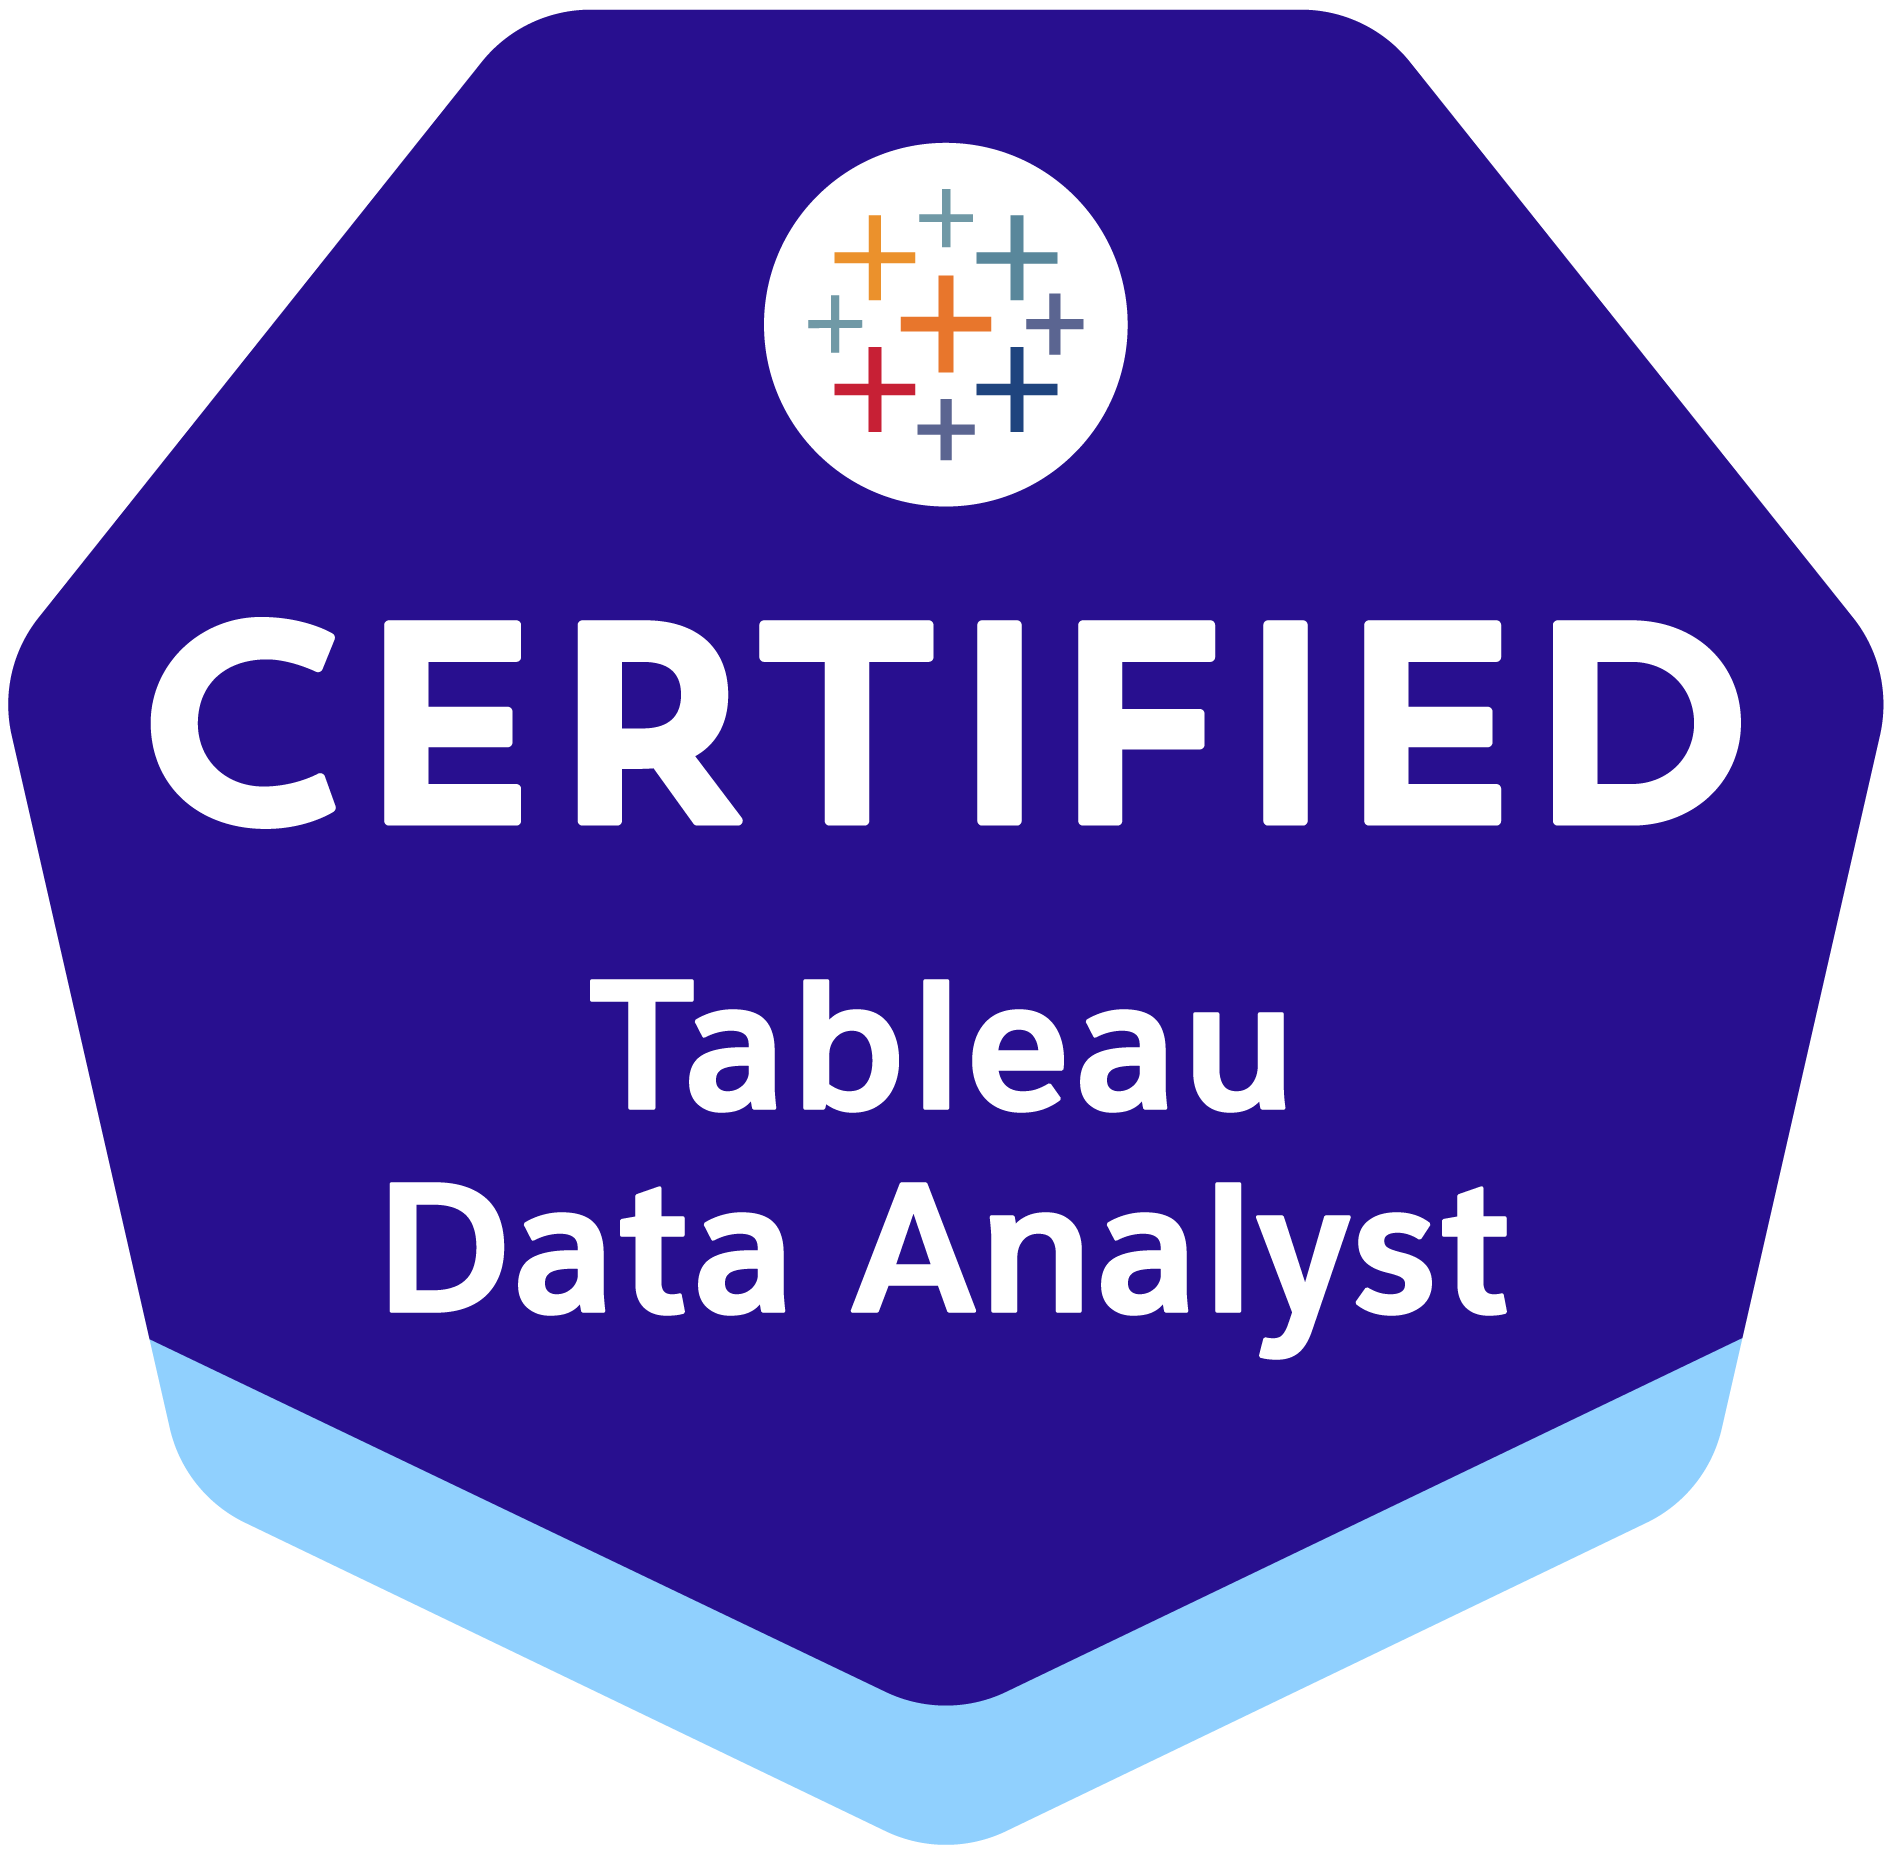 Navigate to Tableau Certified Data Analyst